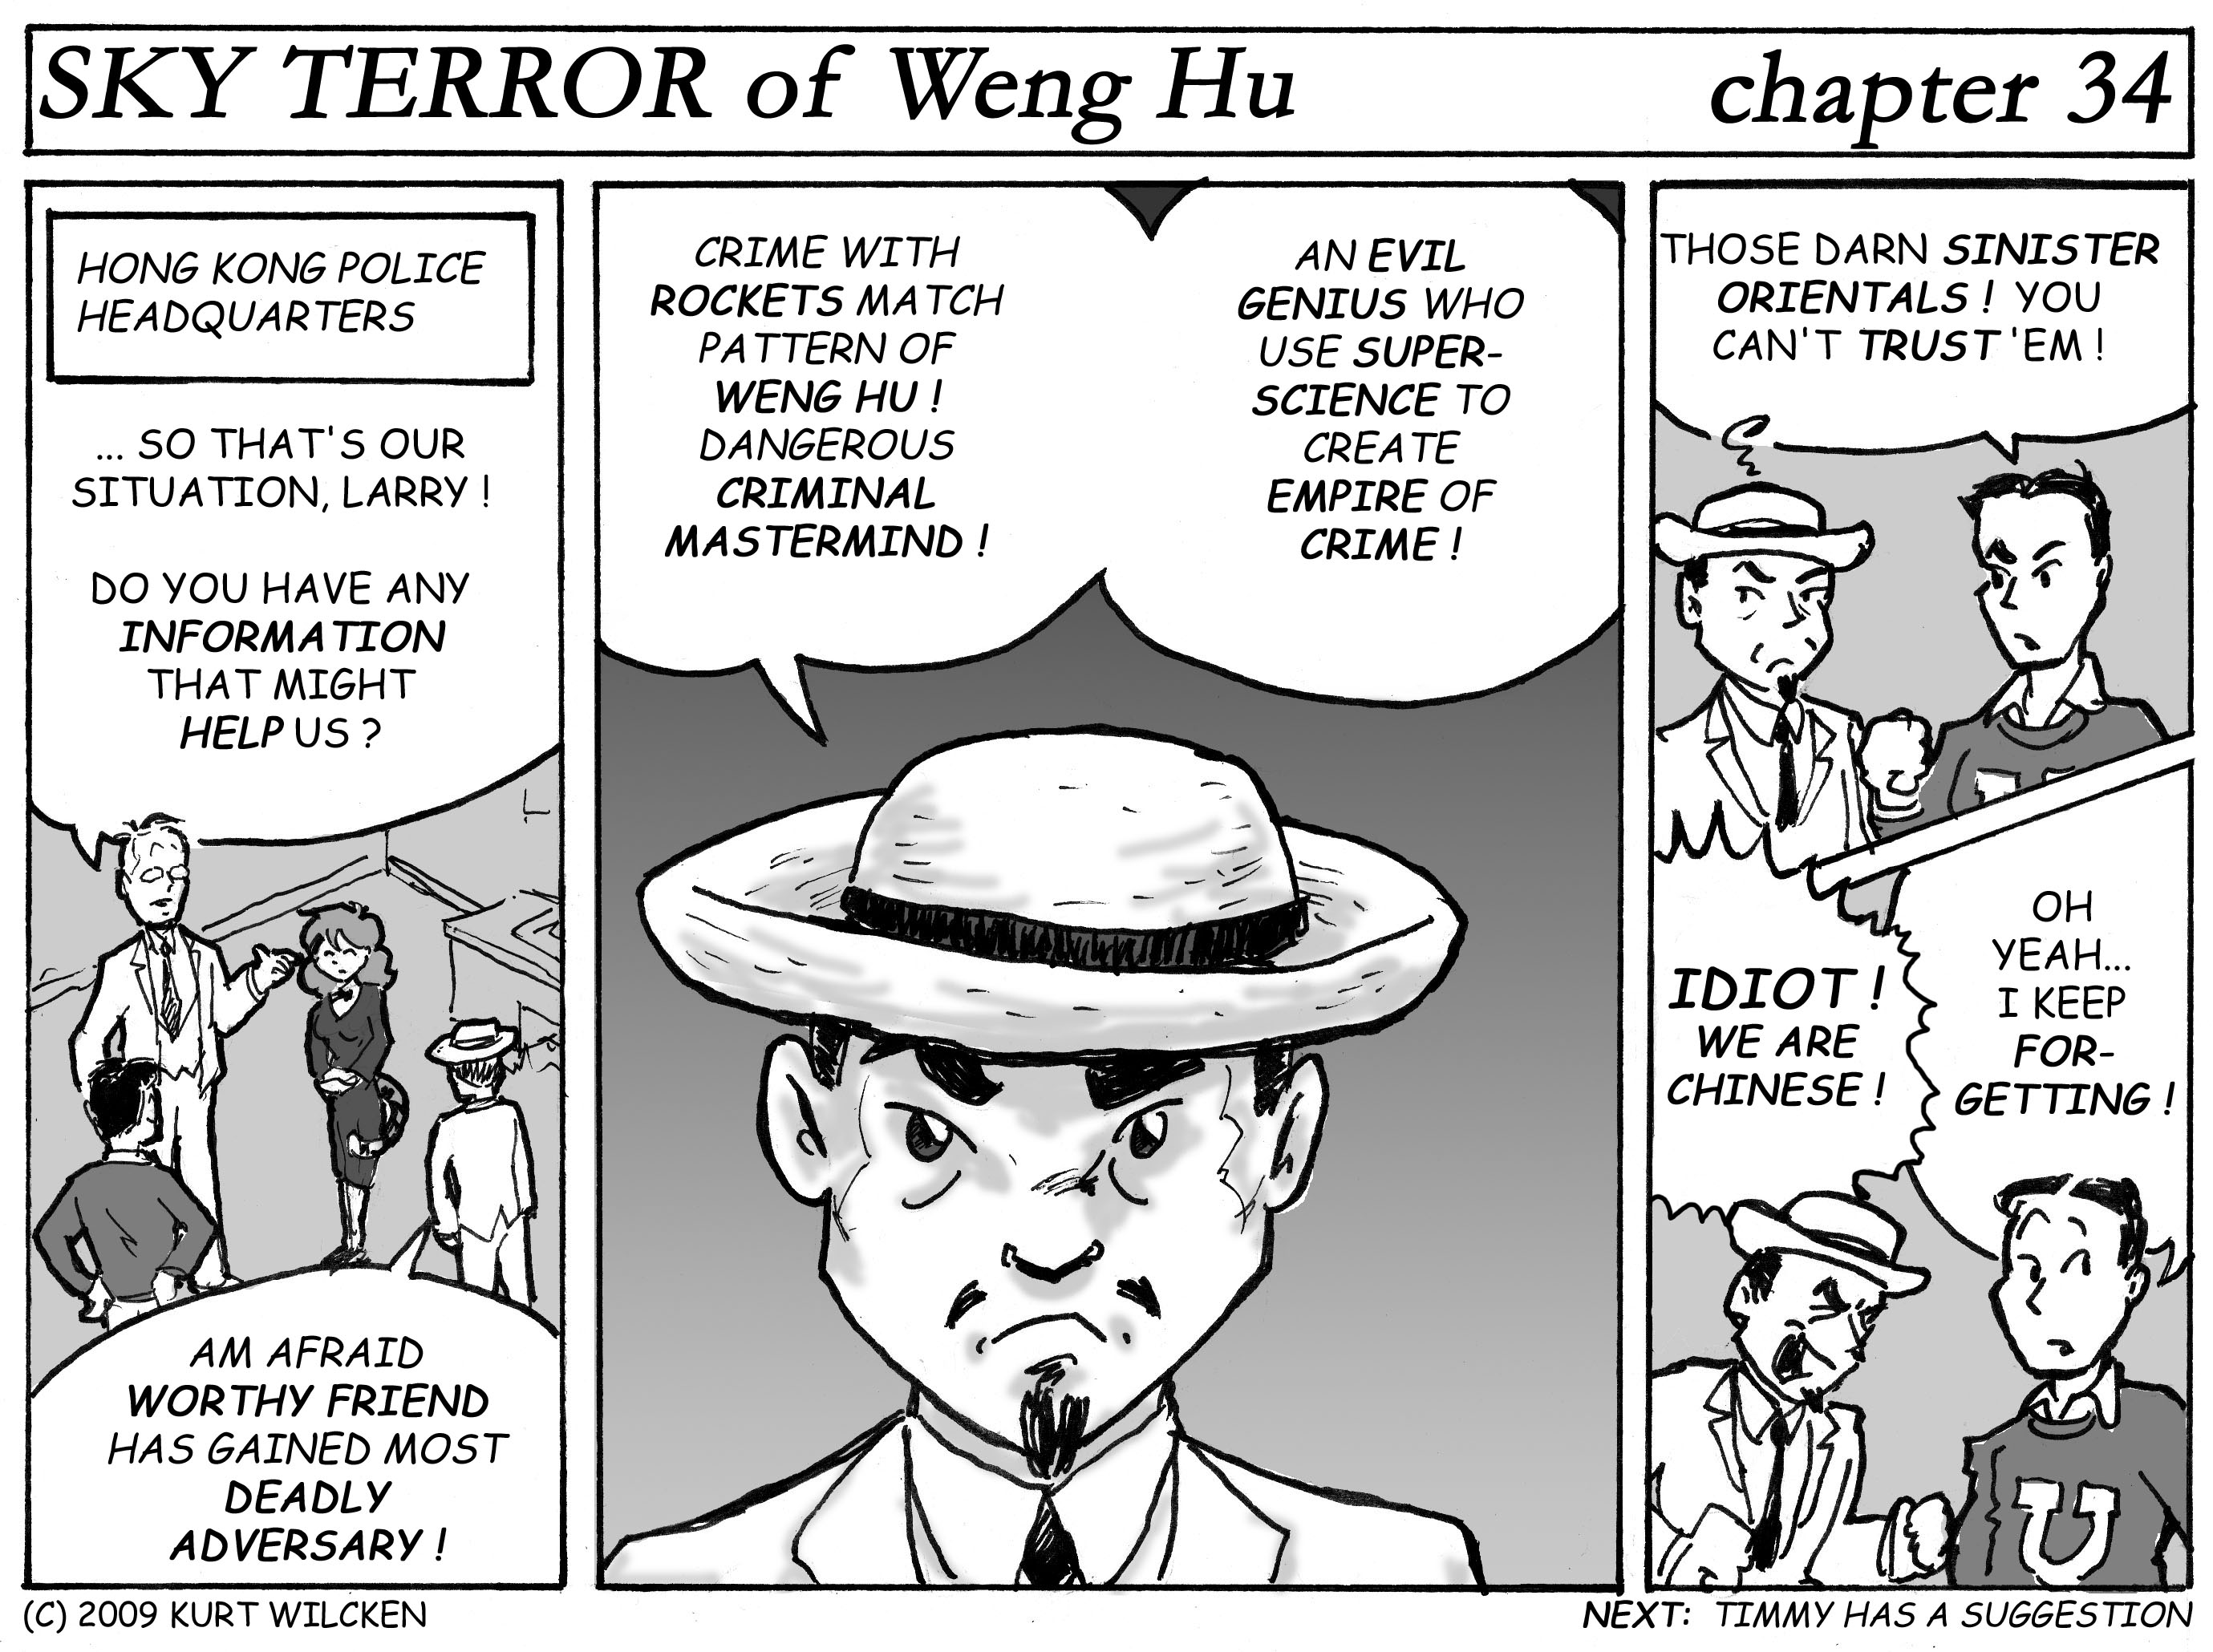 SKY TERROR of Weng Hu:  Chapter 34 — A Deadly Adversary